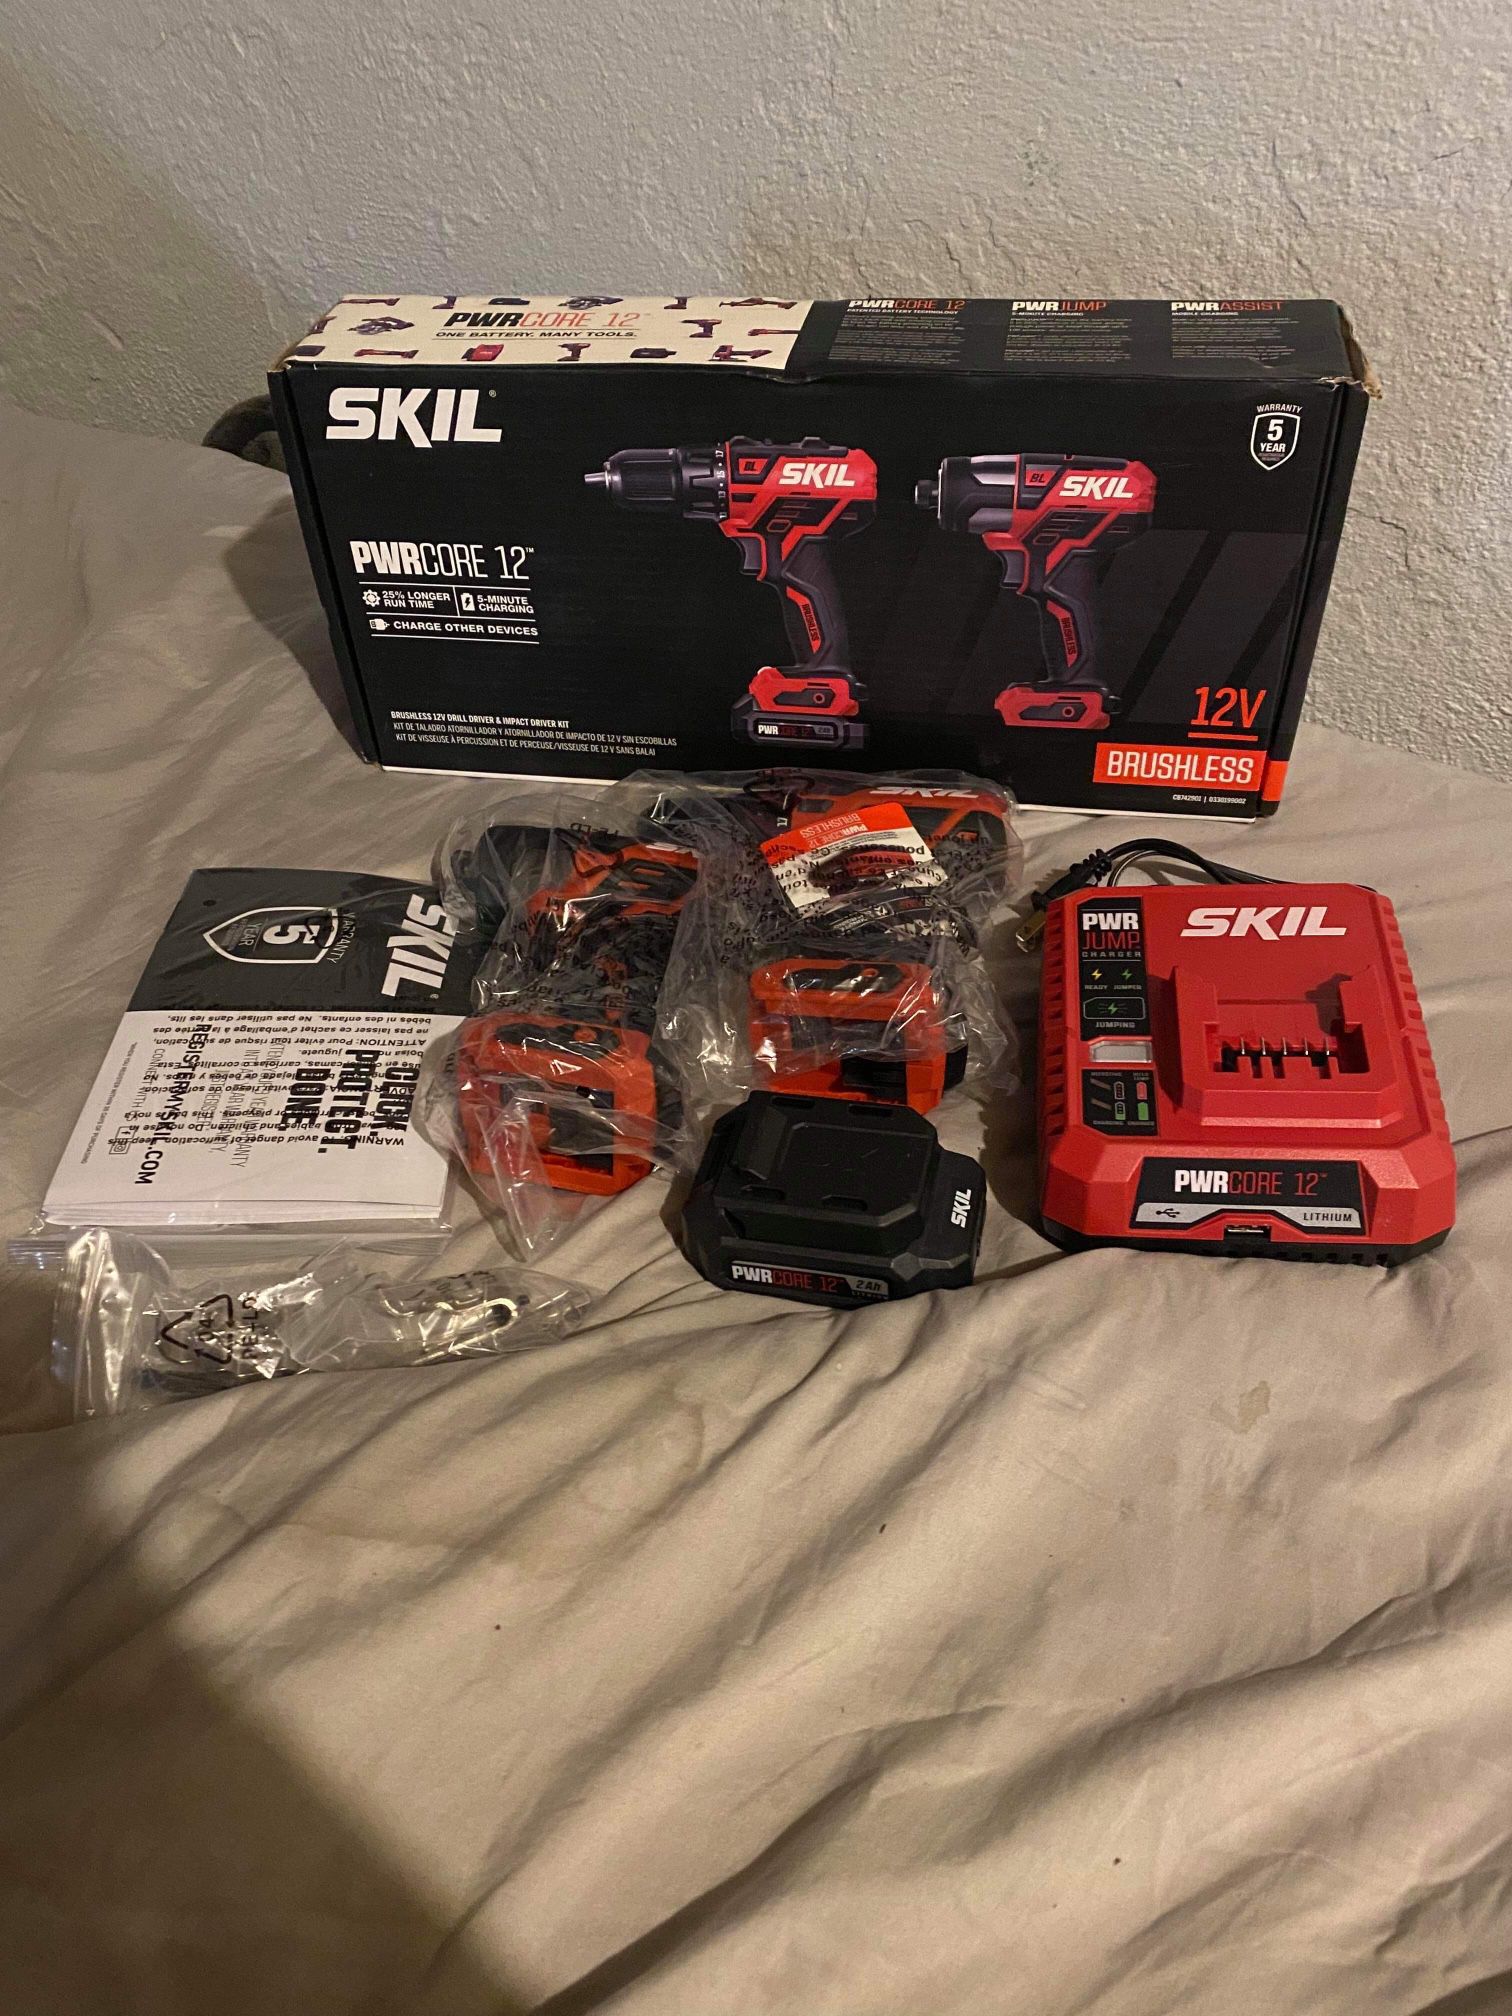 SKIL POWERCORE 12v Drill Driver & Impact Driver Kit With 2 Lithium Batteries & Charger 